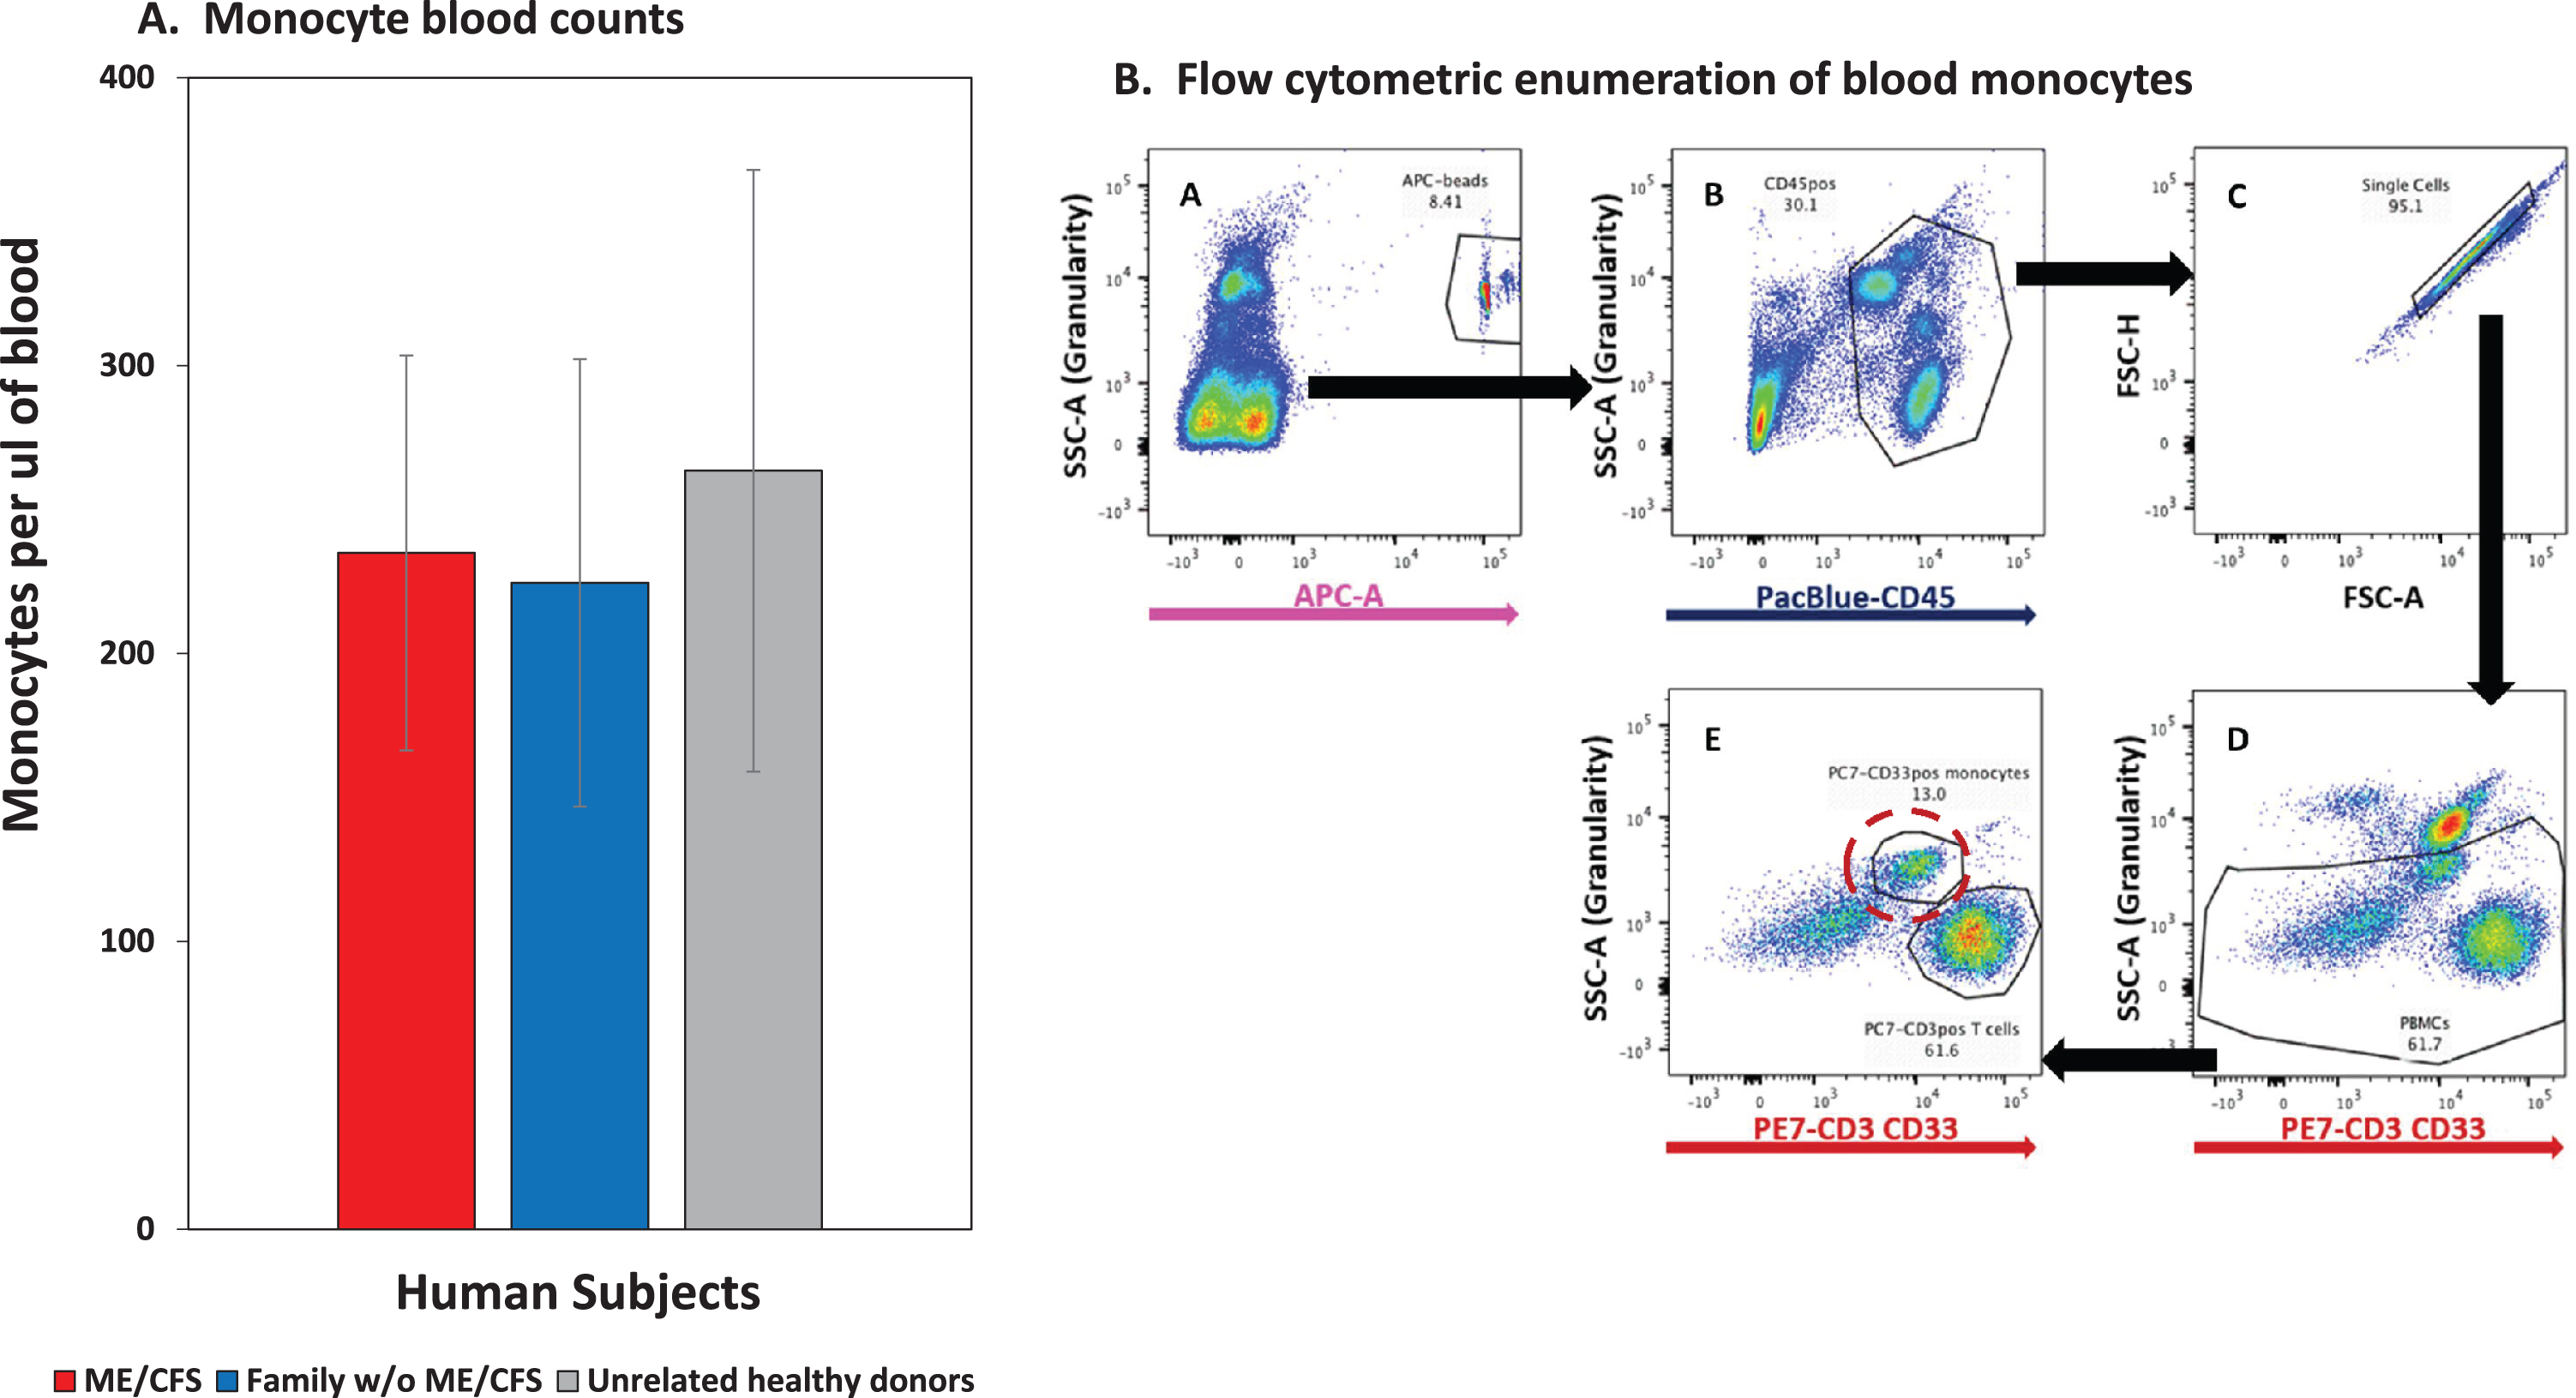 Monocyte blood counts of ME/CFS patients are similar to counts of their family members without ME/CFS and to the counts of unrelated healthy controls. A. Monocytes per ul of blood; average and SD values for families #3, 10 & 28, 16 unaffected family members and 16 unrelated healthy controls. B. Flow cytometric methodology with TruCountR beads for the monocyte blood counts. The blood cells were labeled with a panel of antibodies in tubes containing TruCountR beads, and the cells were analyzed without washing in order to avoid selective cell losses that can be caused by washes to remove unbound antibodies. Each sequential step of cell gating, that was used to detect the beads and the CD33positive & high side scatter monocytes, is indicated by letters with arrows to indicate the cells selected for each sequential gate. The monocytes are circled in dashed red in step E.